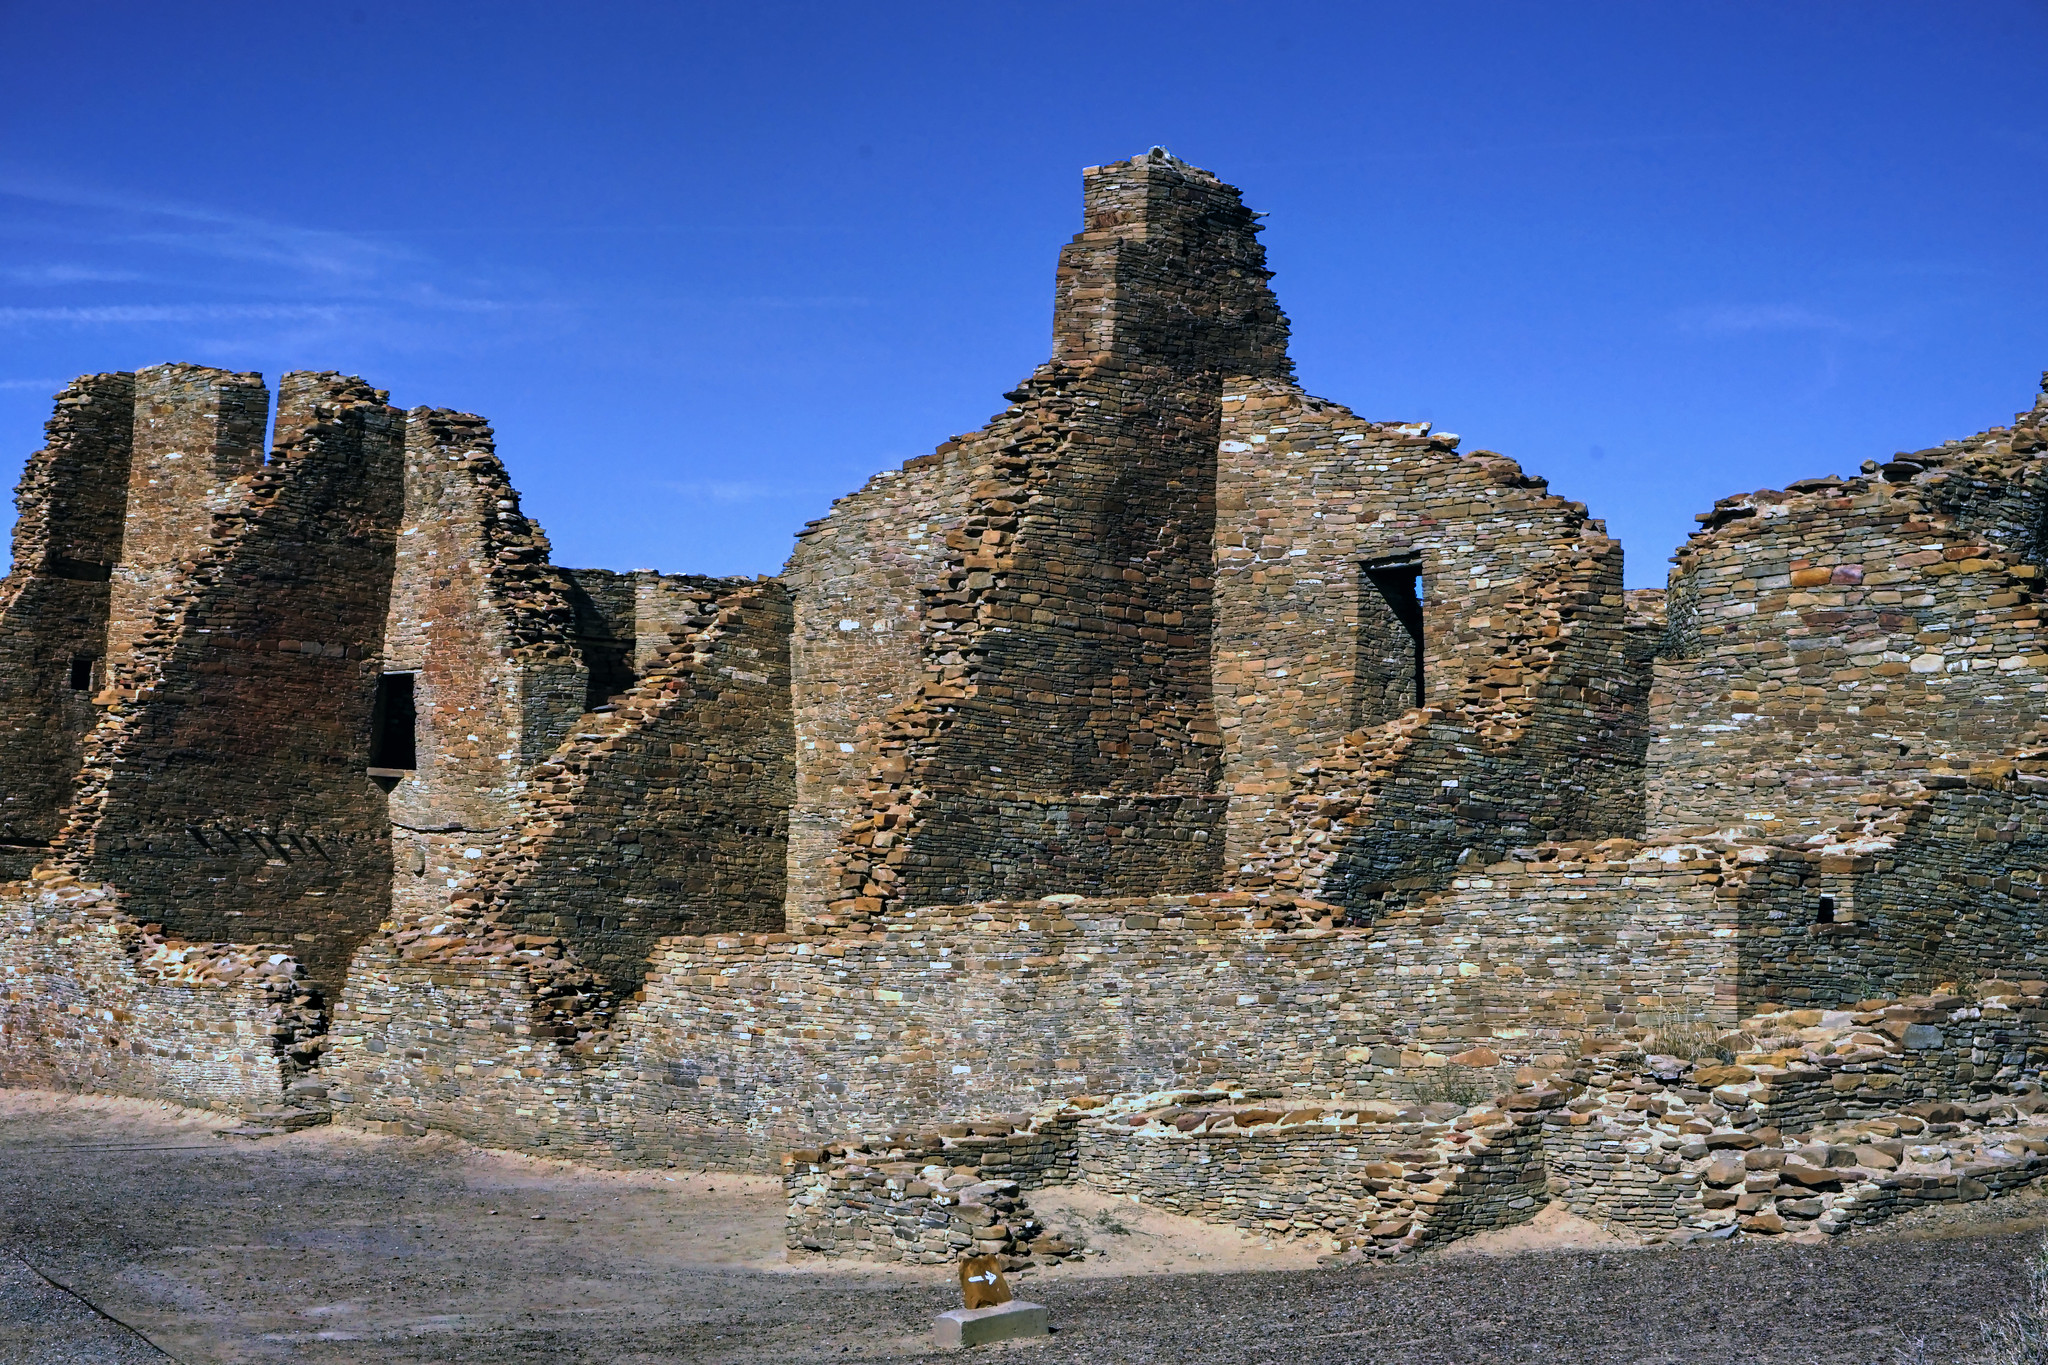 Ancient ruins of a large stone structure with partially intact walls against a clear blue sky.